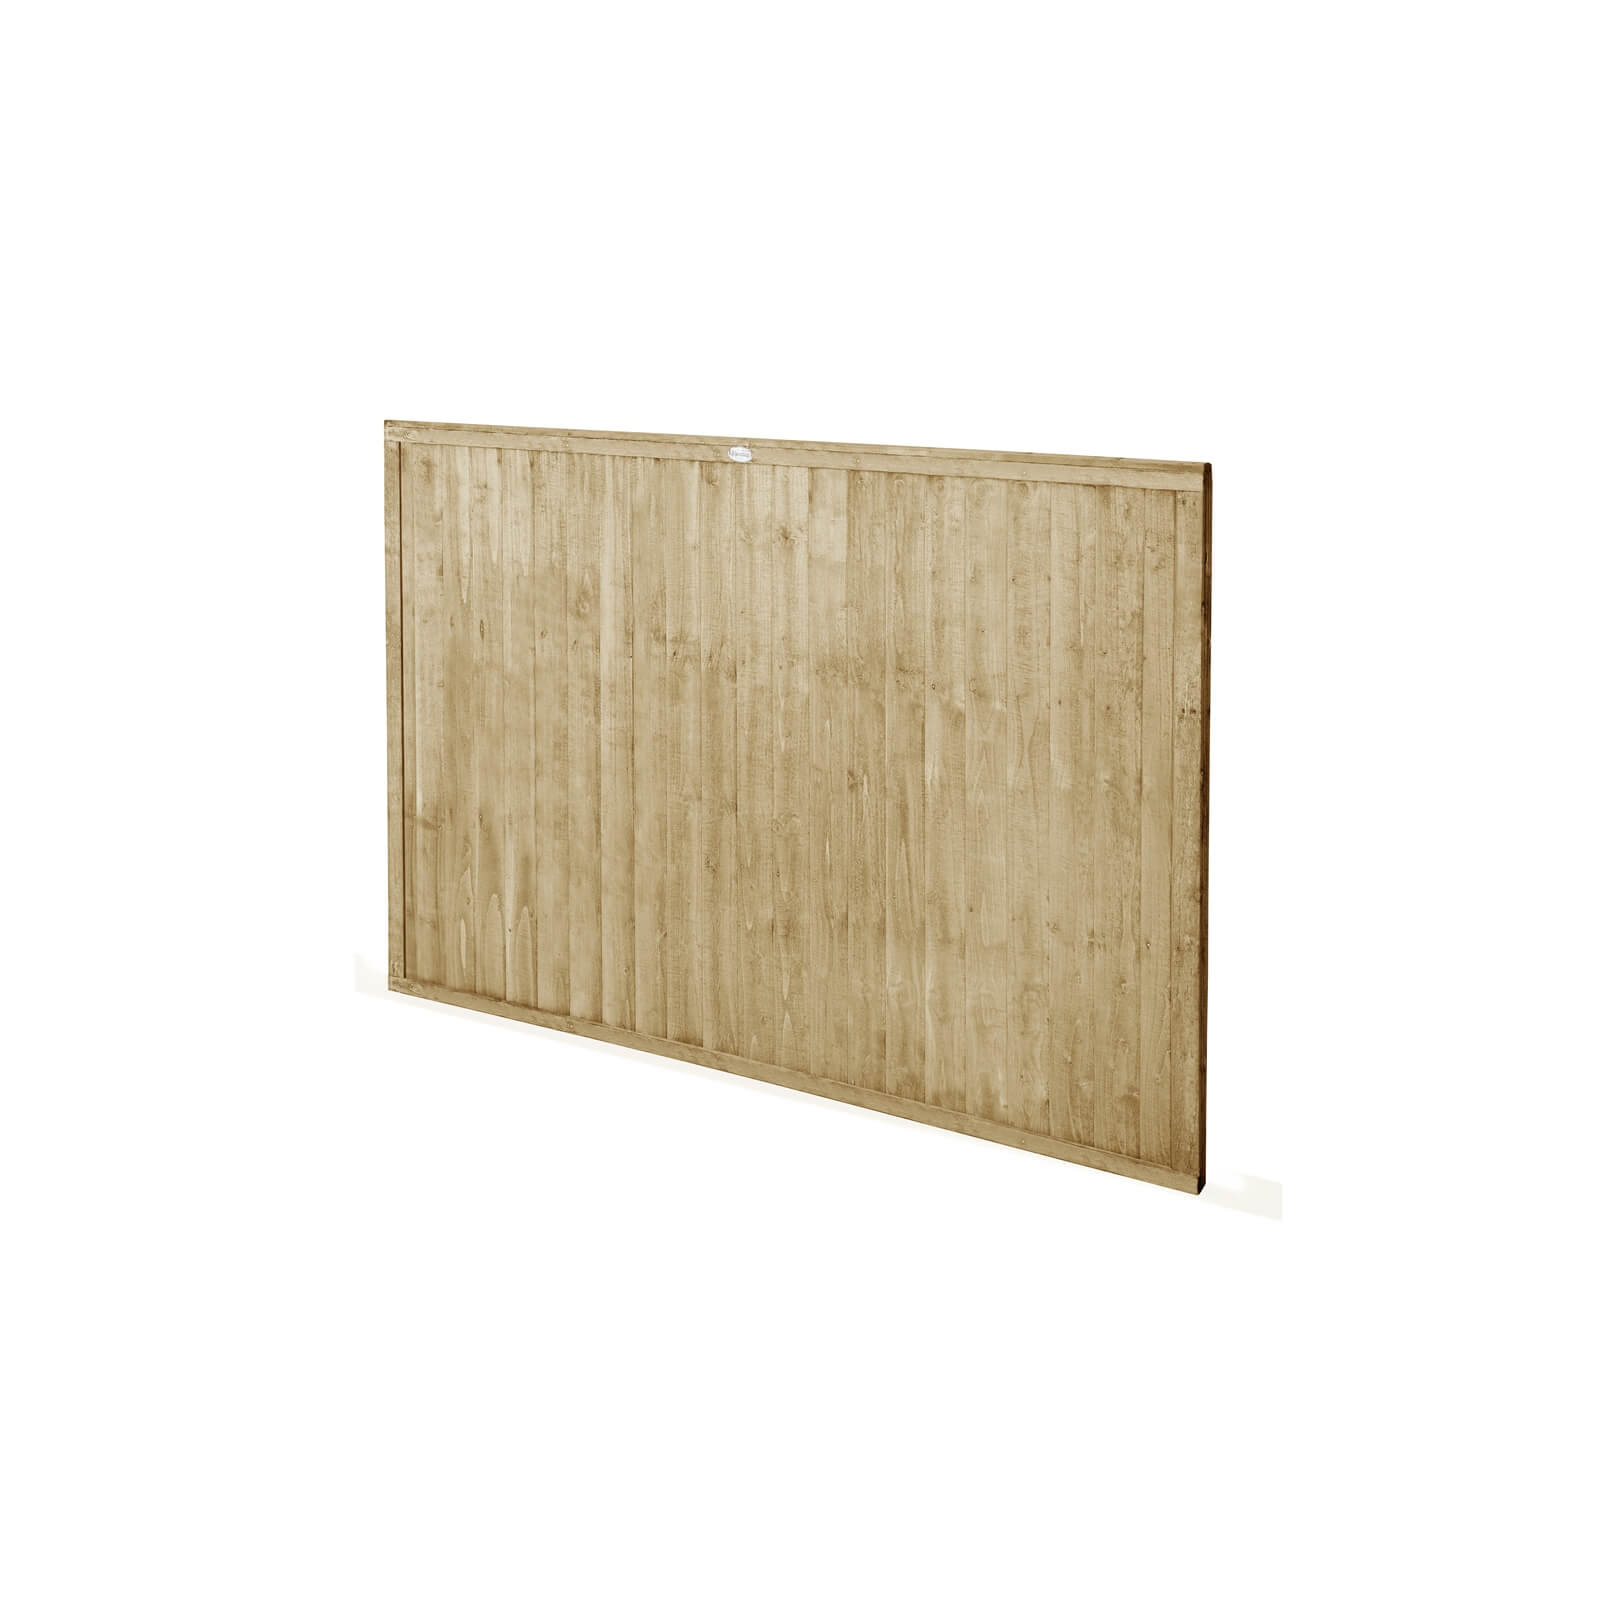 6ft x 4ft (1.83m x 1.22m) Pressure Treated Closeboard Fence Panel - Pack of 20